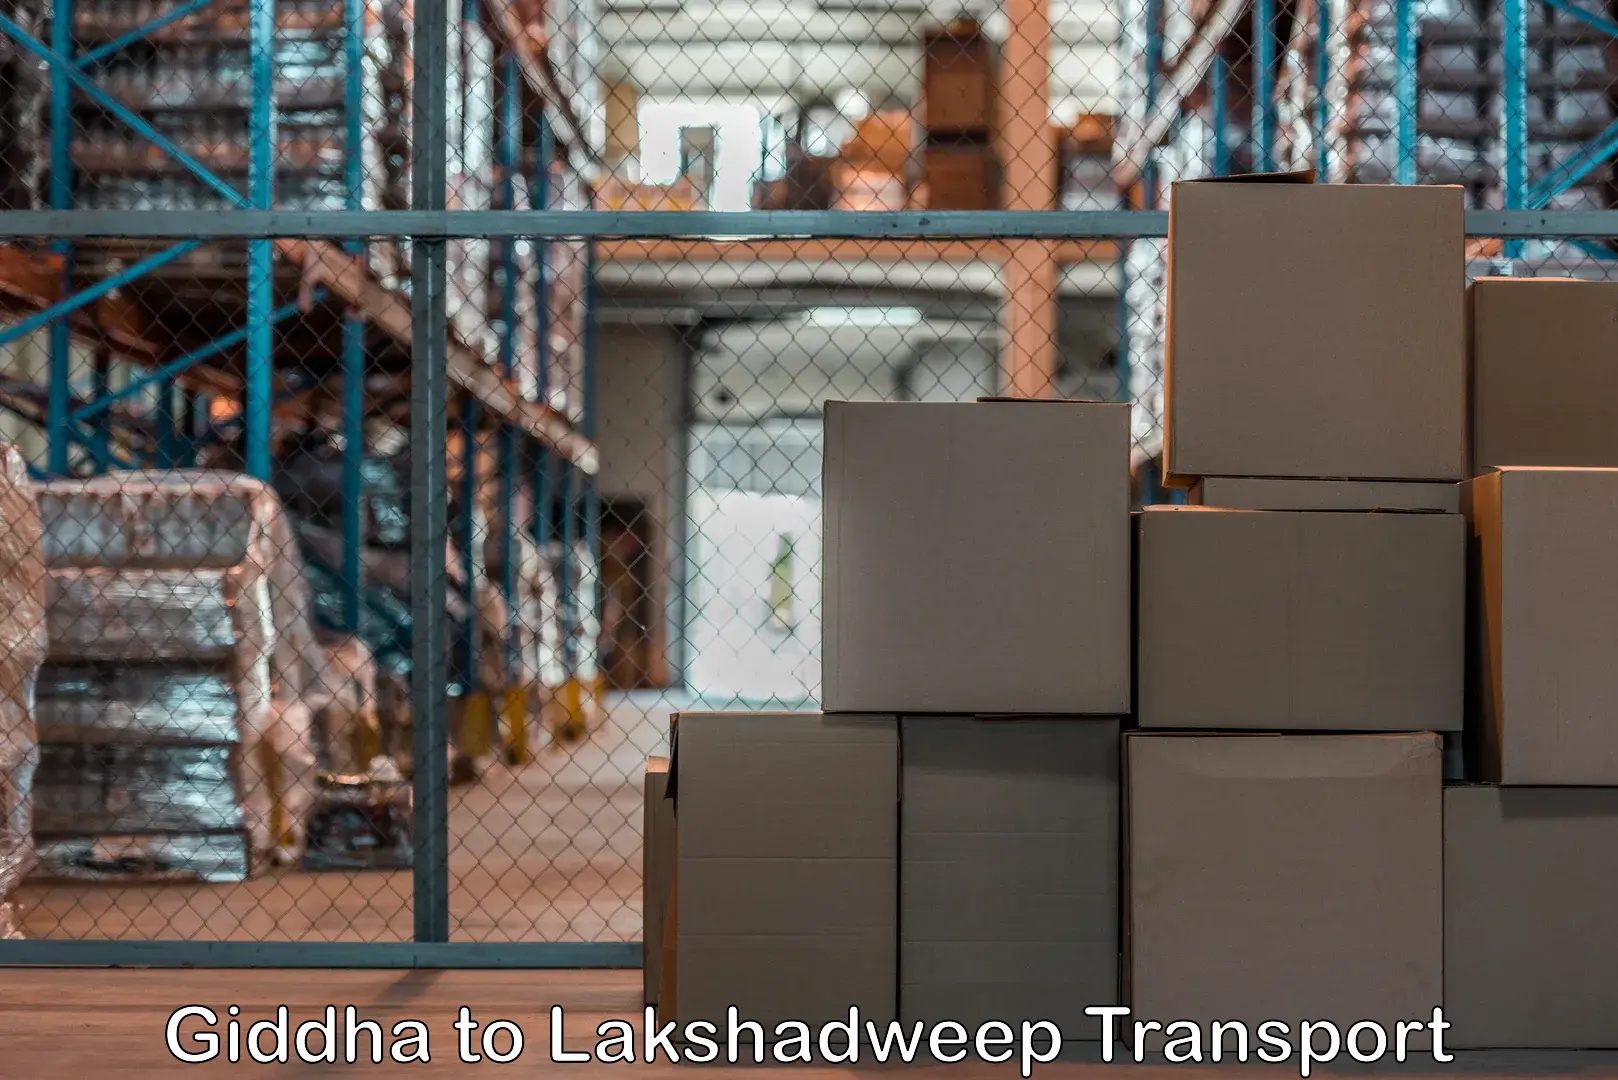 Transport shared services Giddha to Lakshadweep